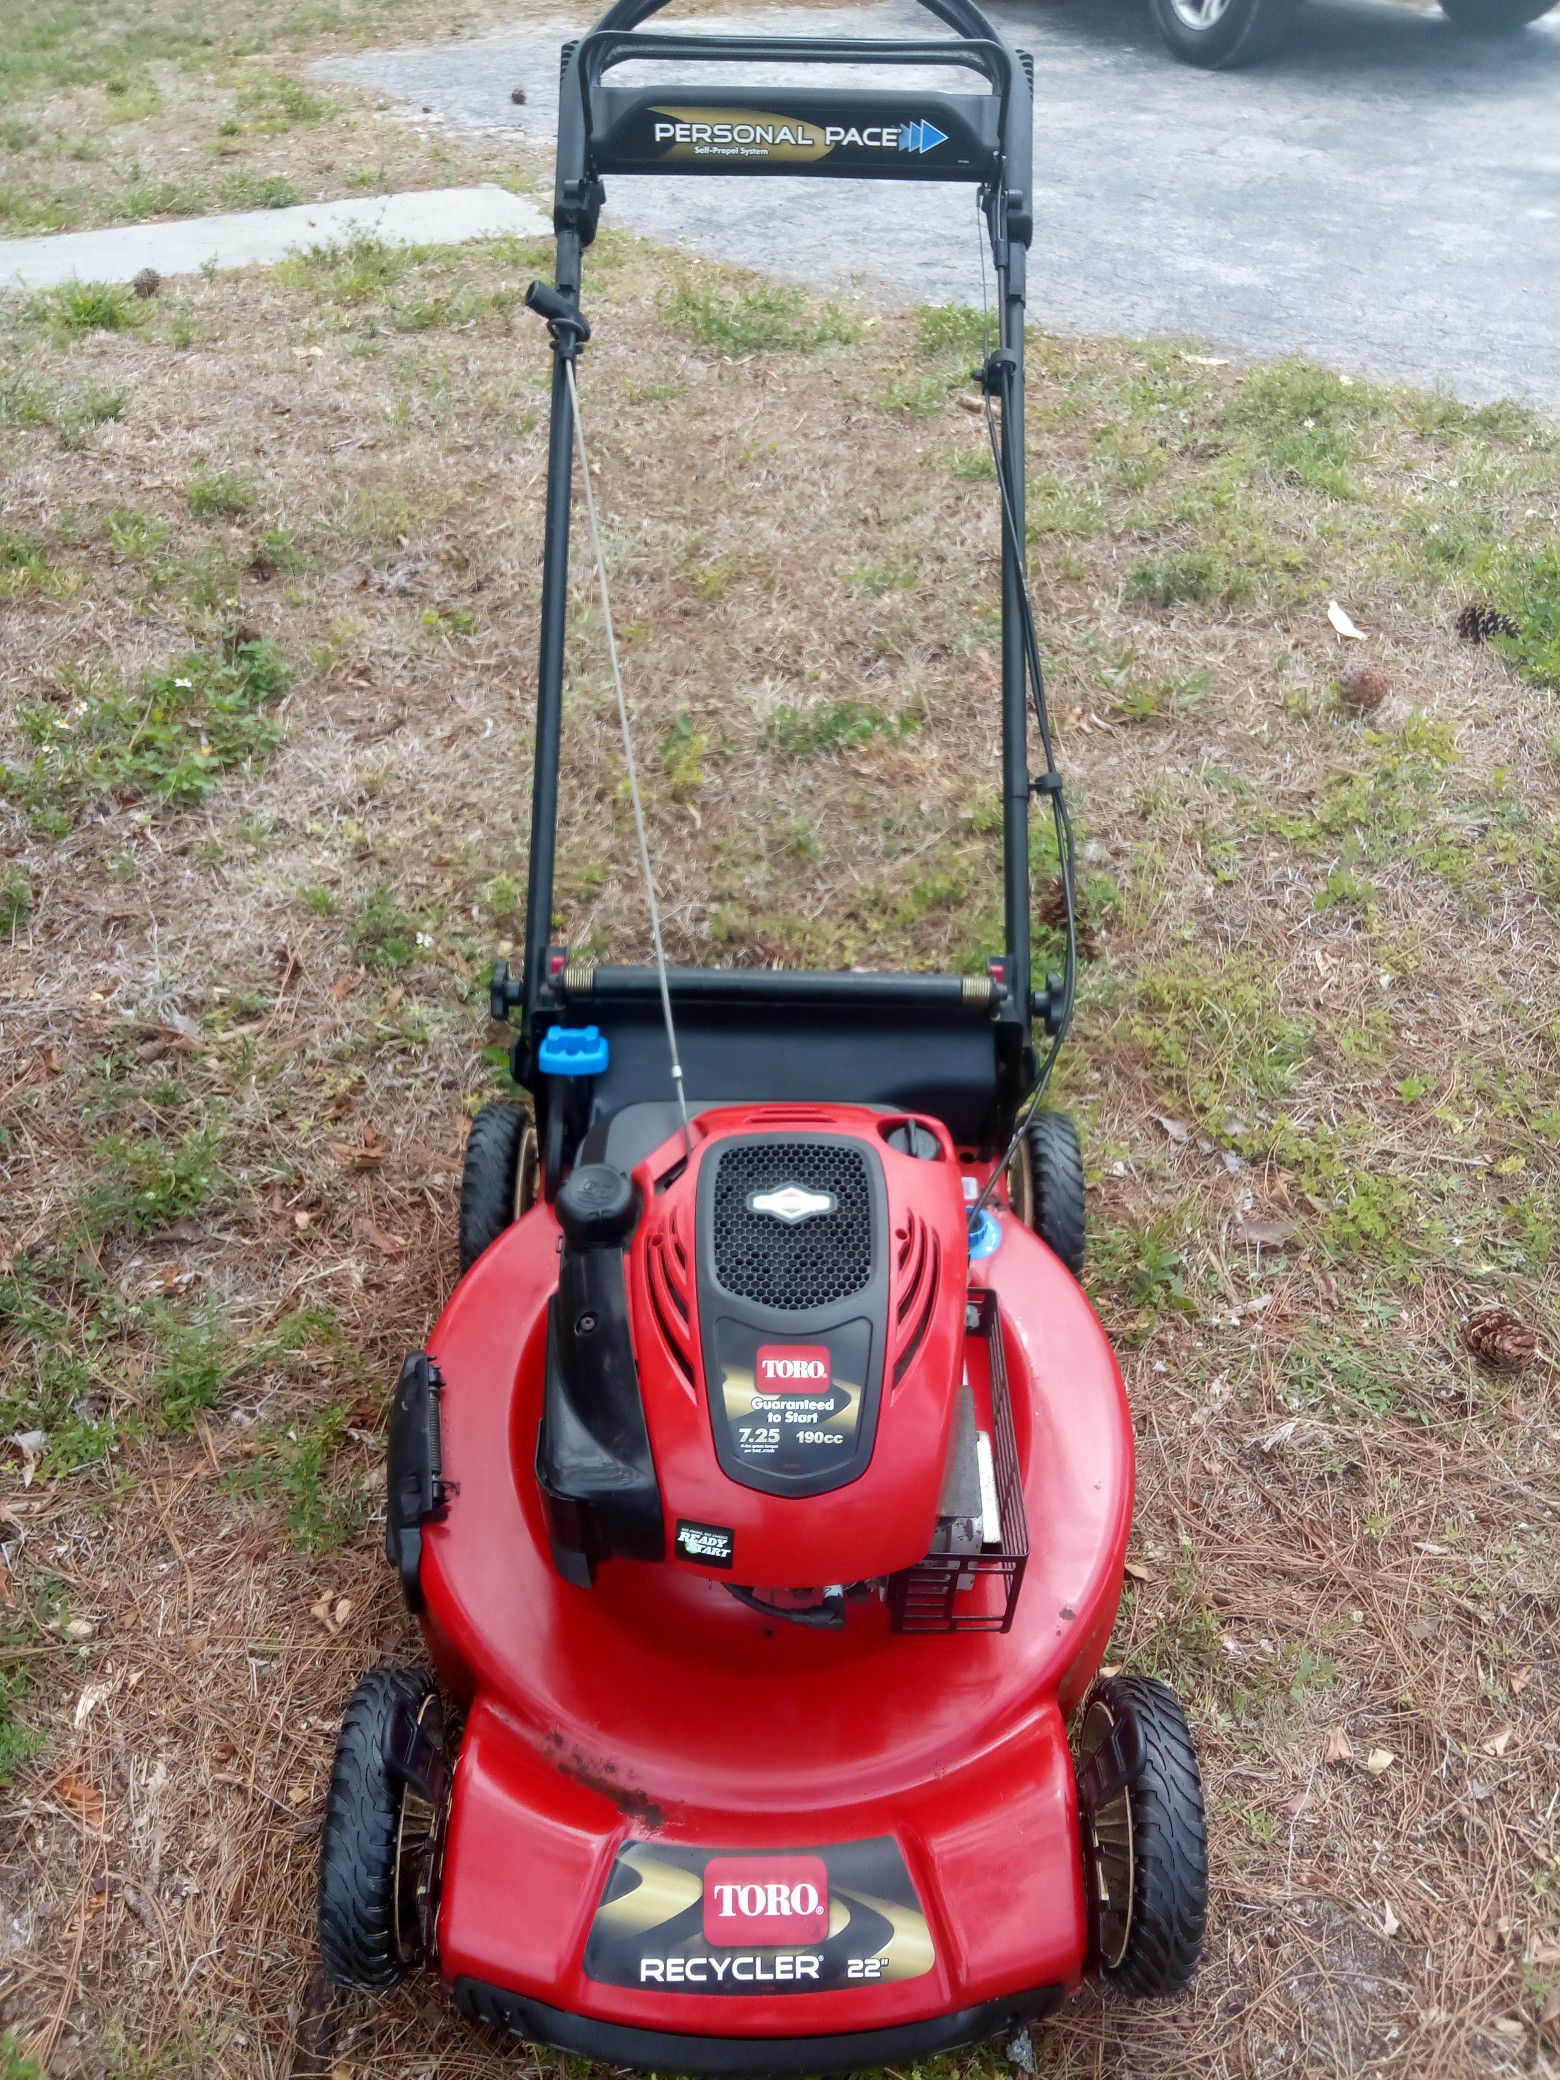 lawn mower Toro self-propelled personal pace guaranteed to start 7.25 190cc Toro recycler 22 Bl